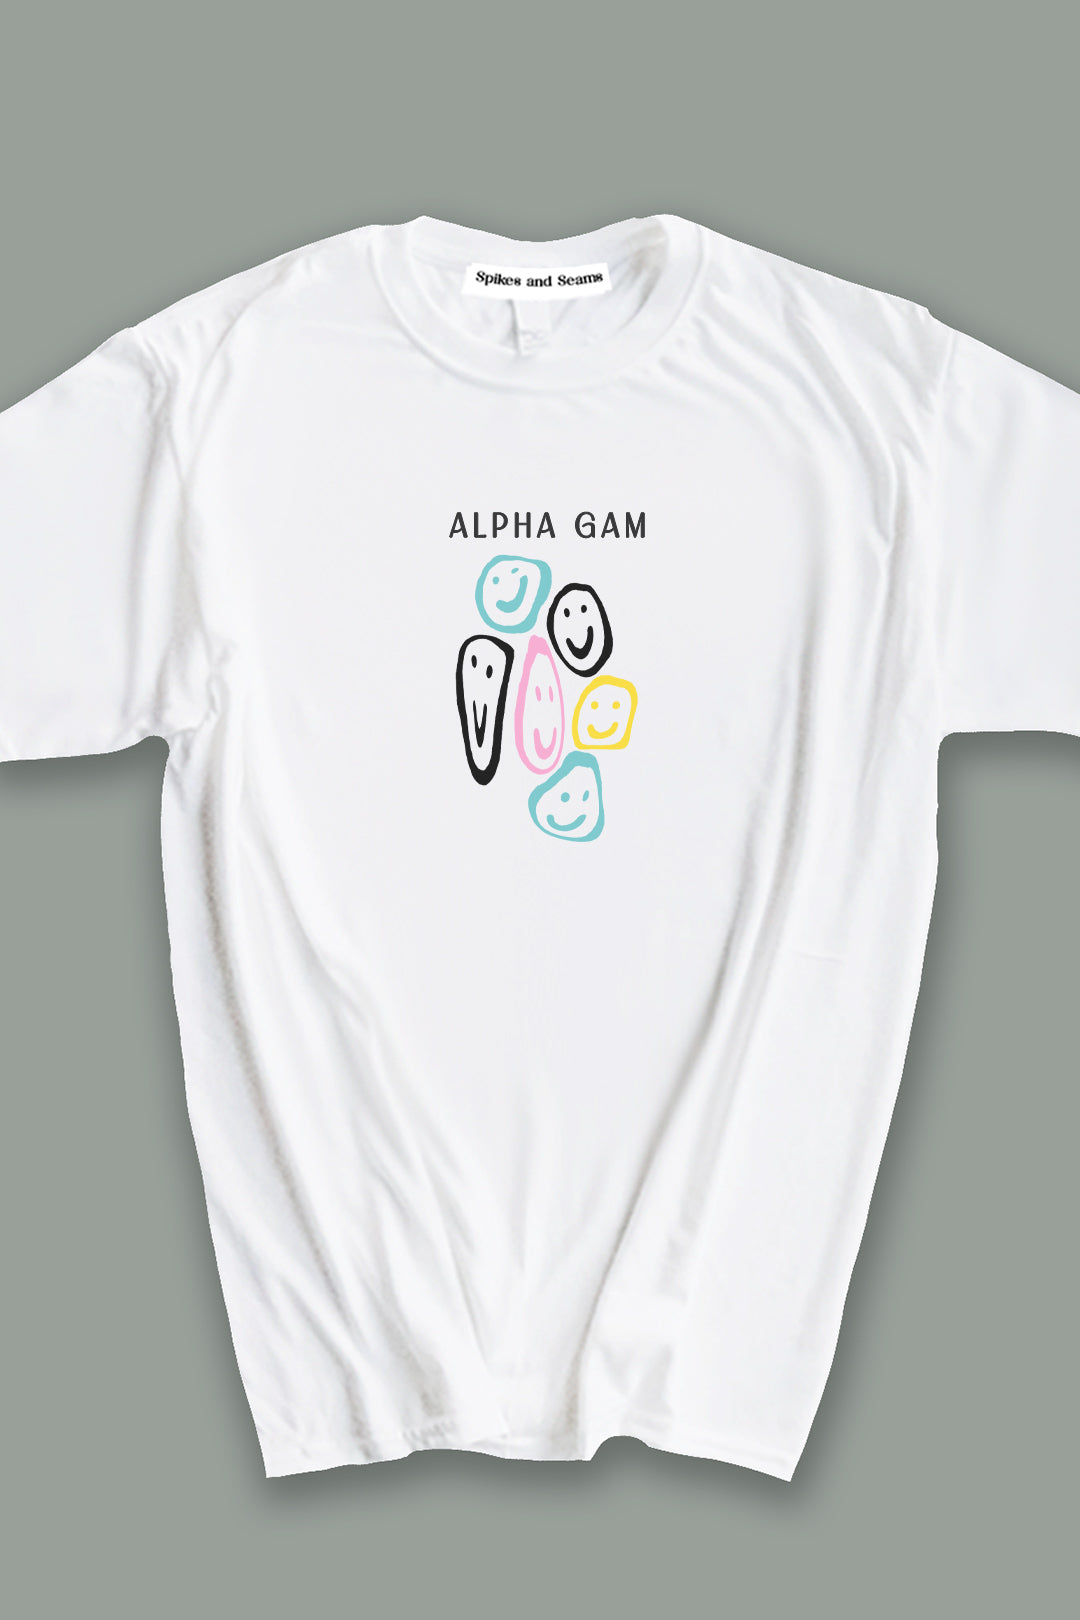 Smiley tee - Alpha Gam - Spikes and Seams Greek